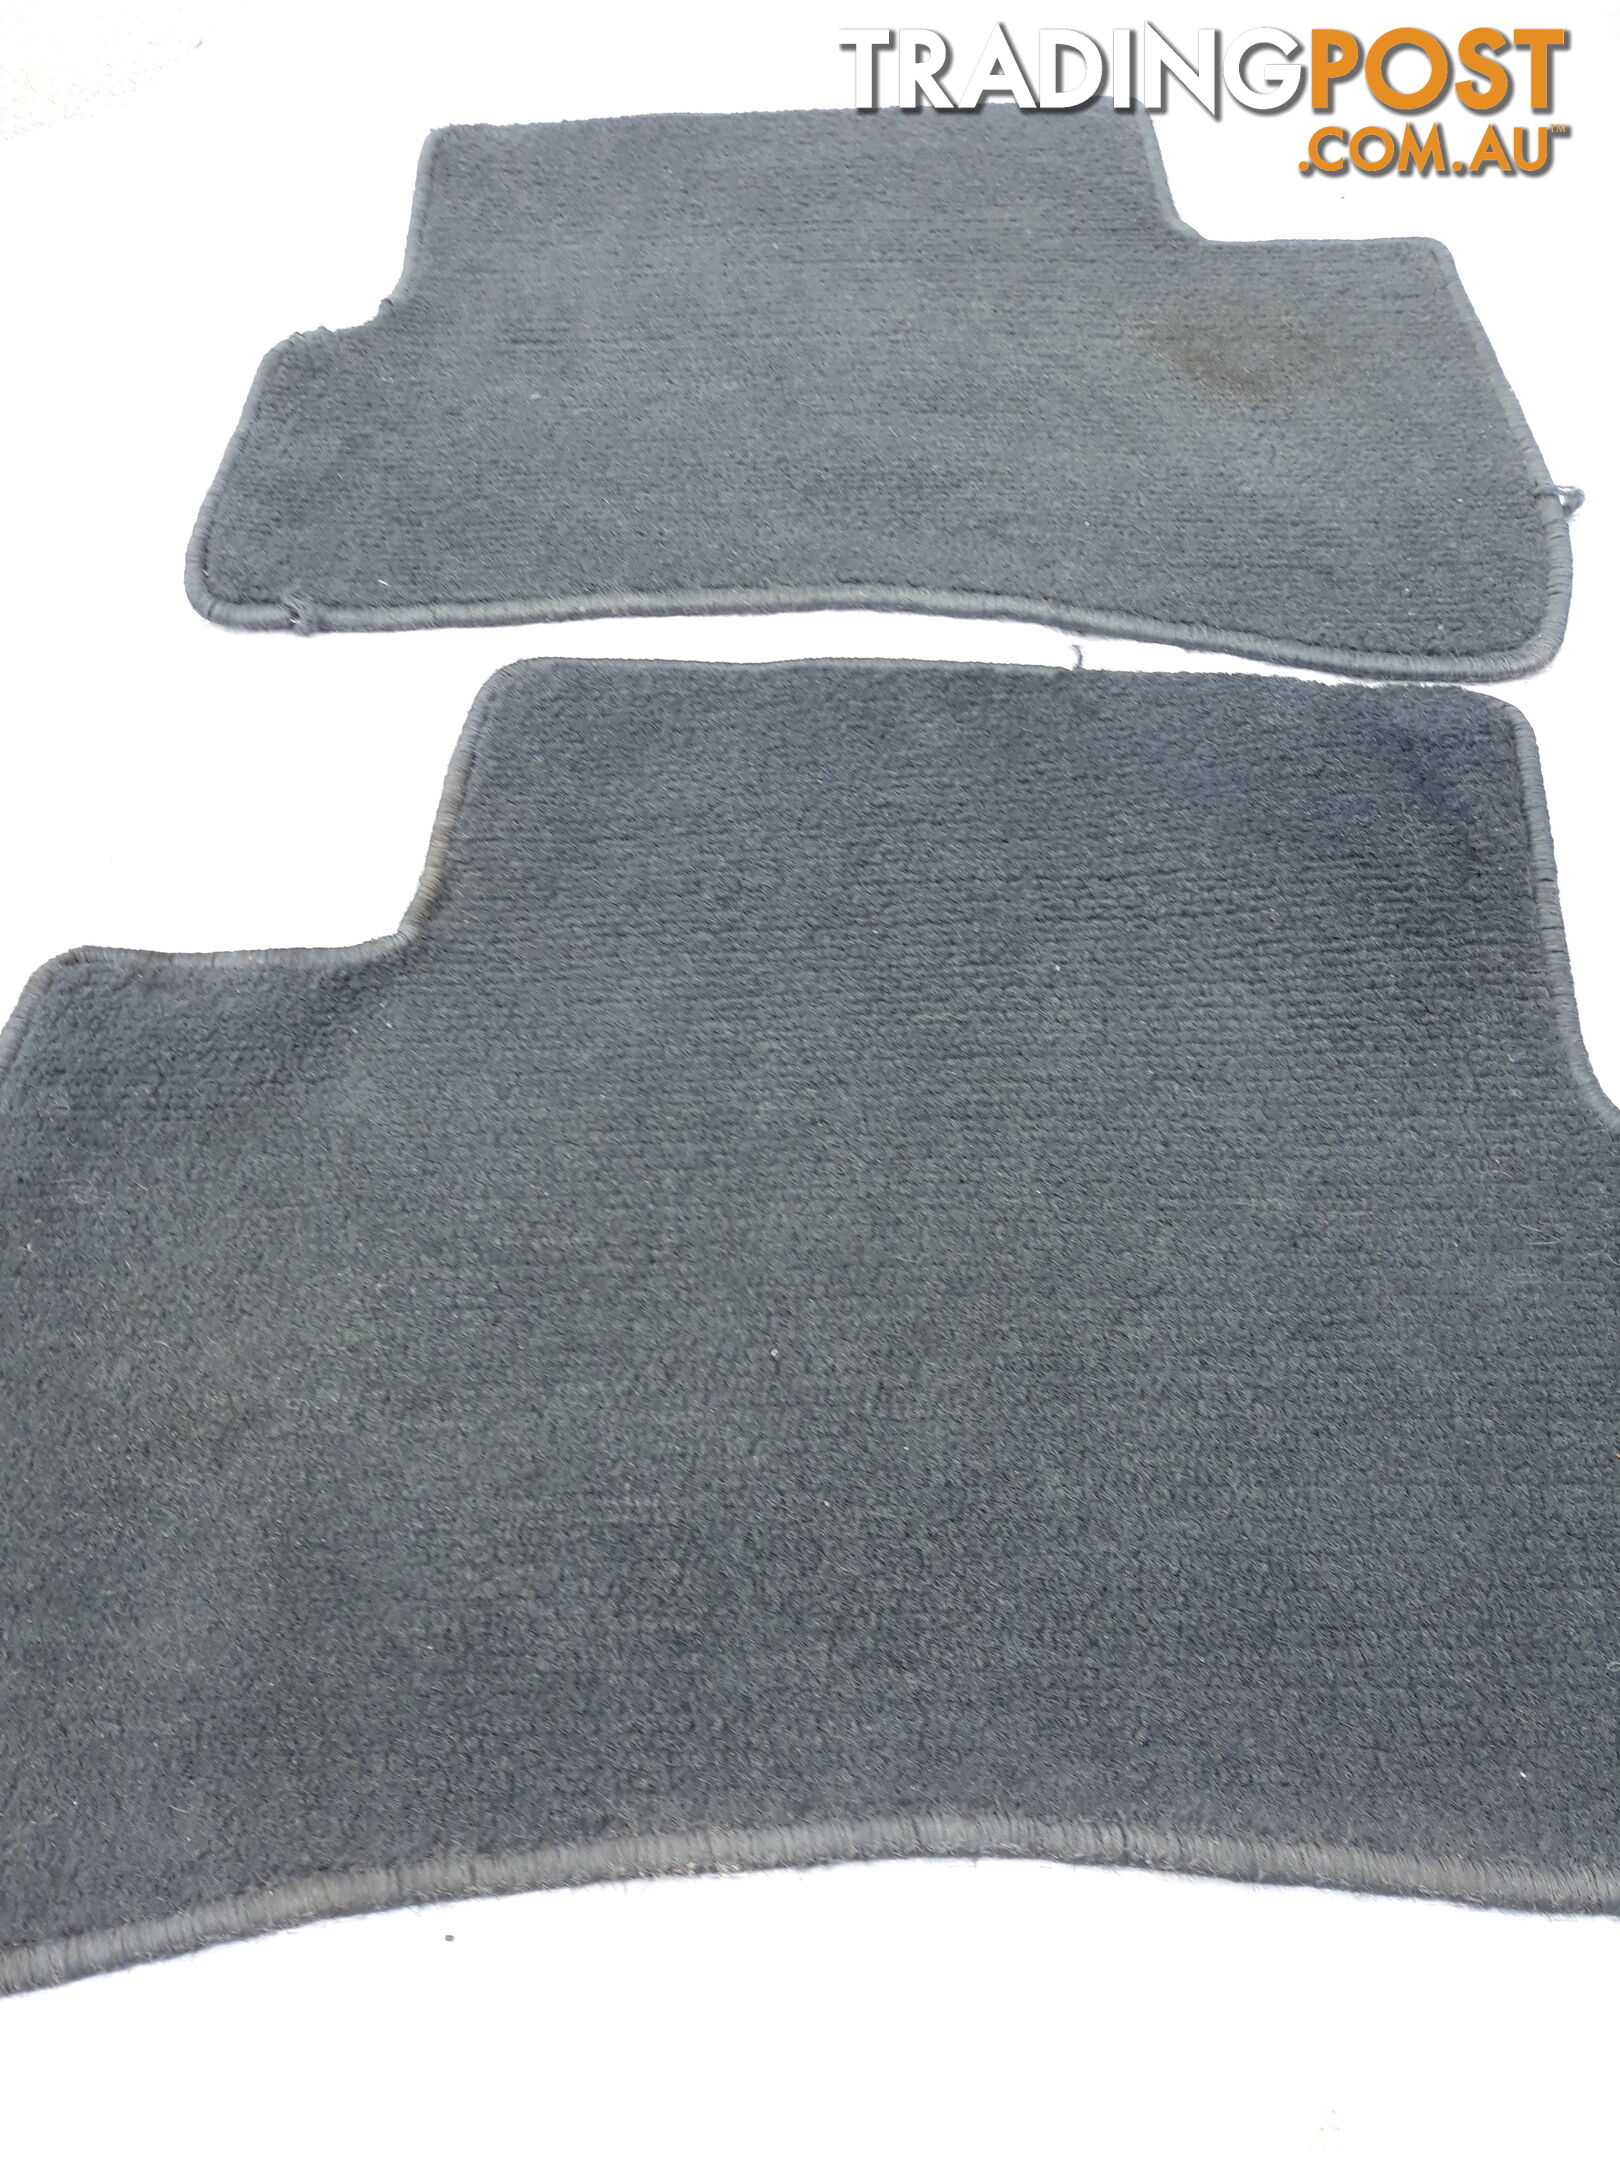 Floor mats for car – three in total